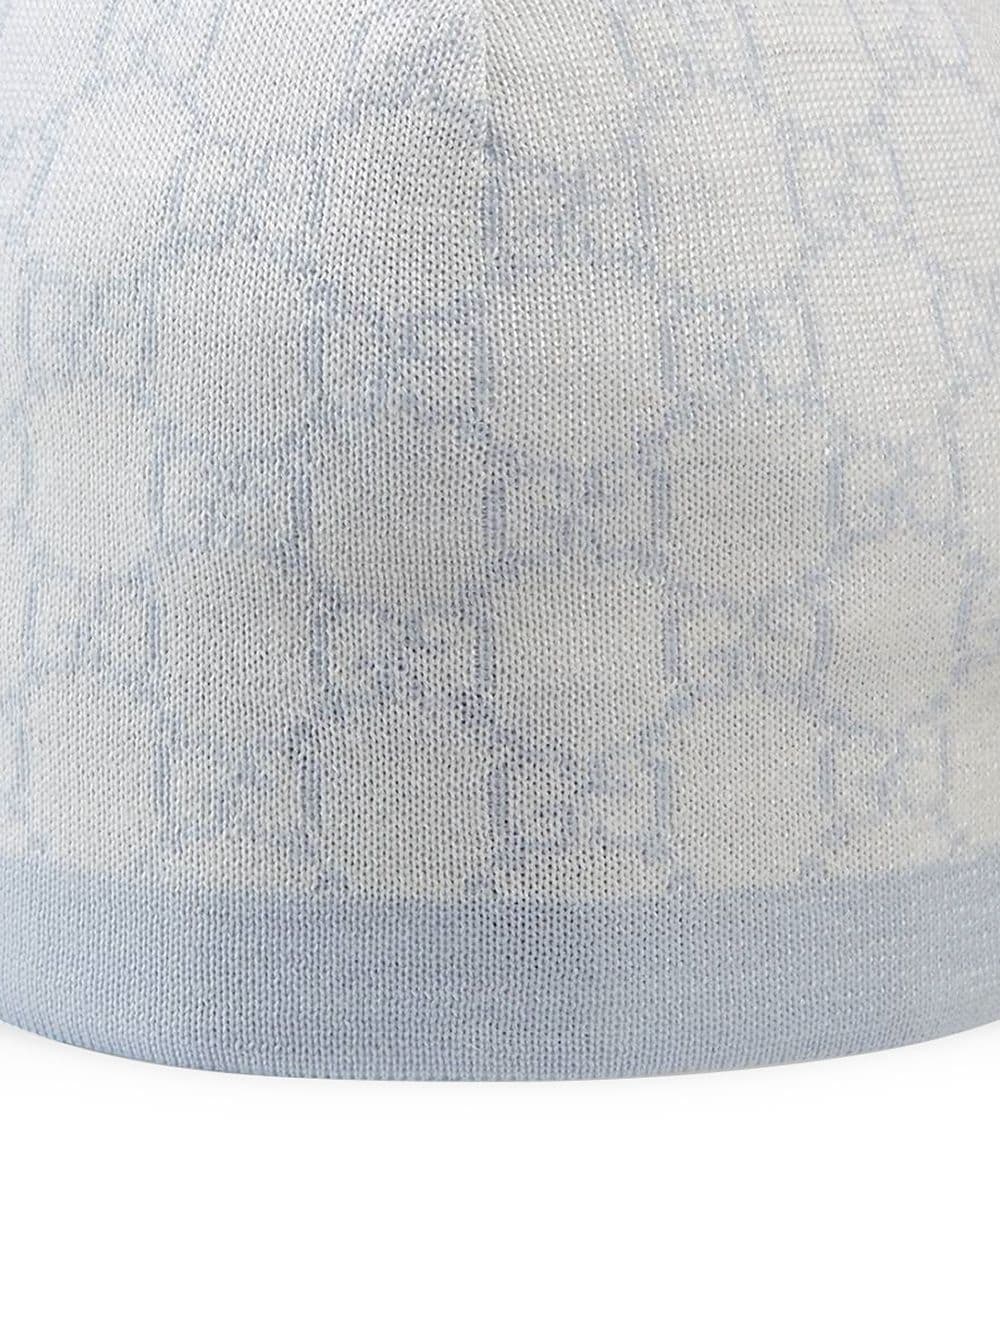 Ivory and light blue hat for newborns